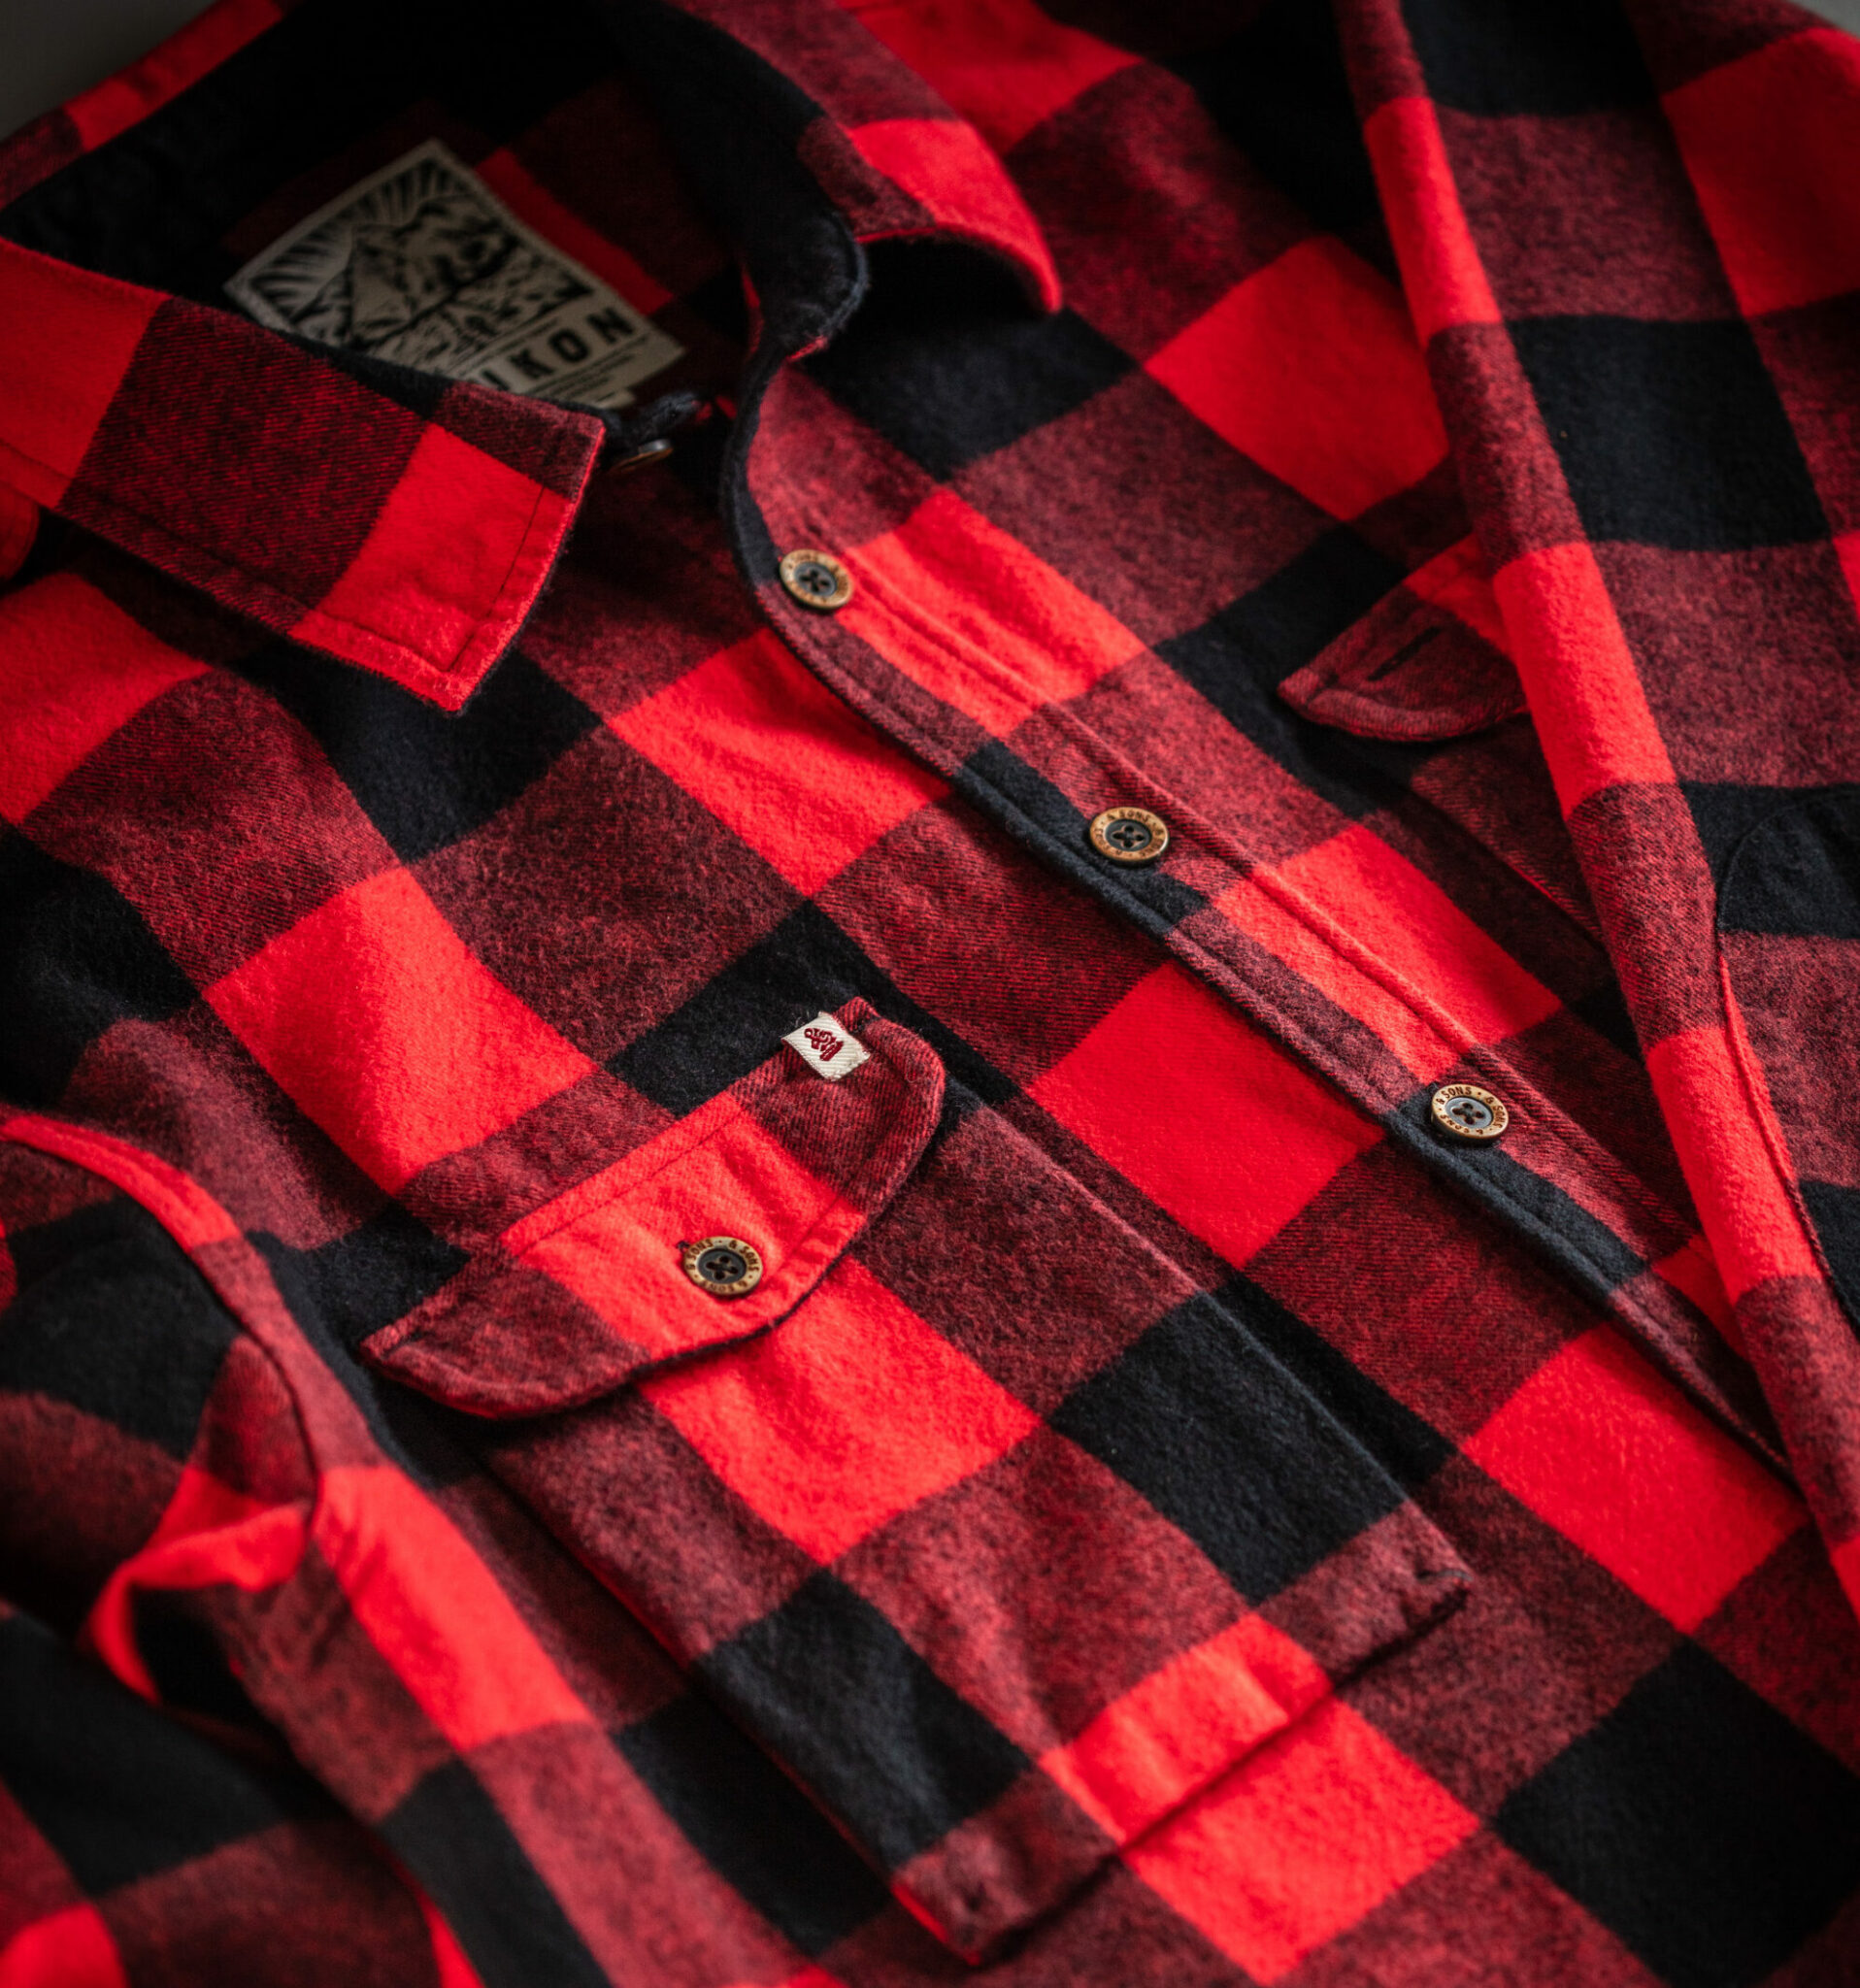 Buying Guide to the Best Well-Made and Heavy Flannel Shirts